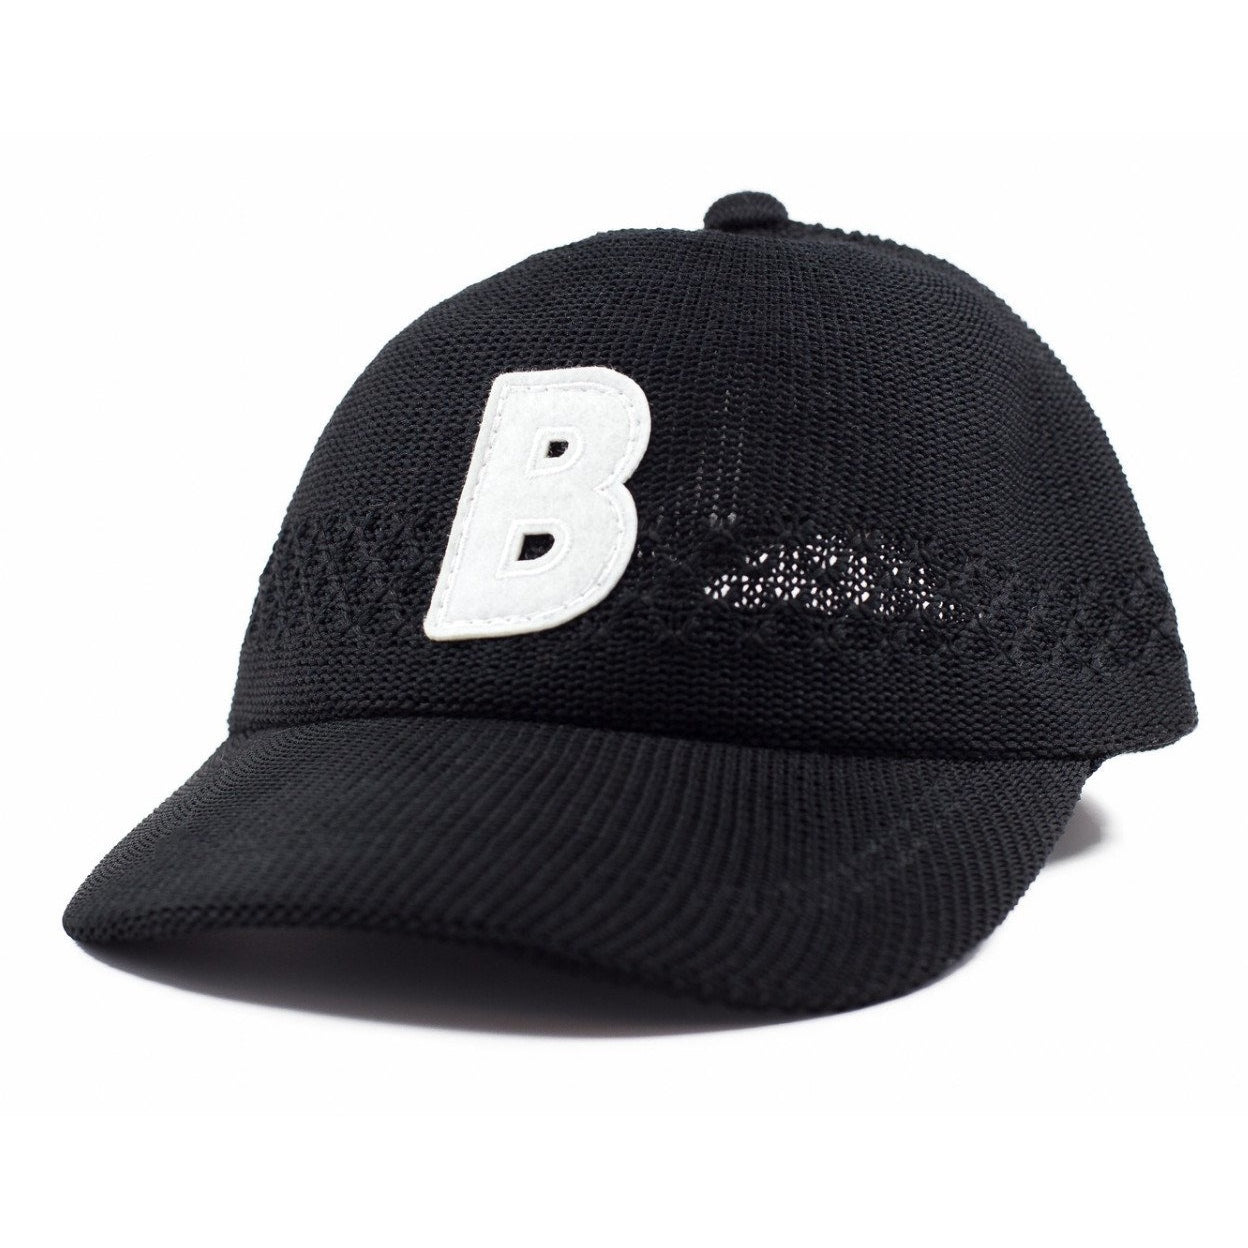 6-panel unconstructed Cotton african black mesh dad hat featuring BLED letter logo felt patch on the front and BLED logo embroidered on the back with adjustable strap closure. skate, skateboarding, hype, streetwear